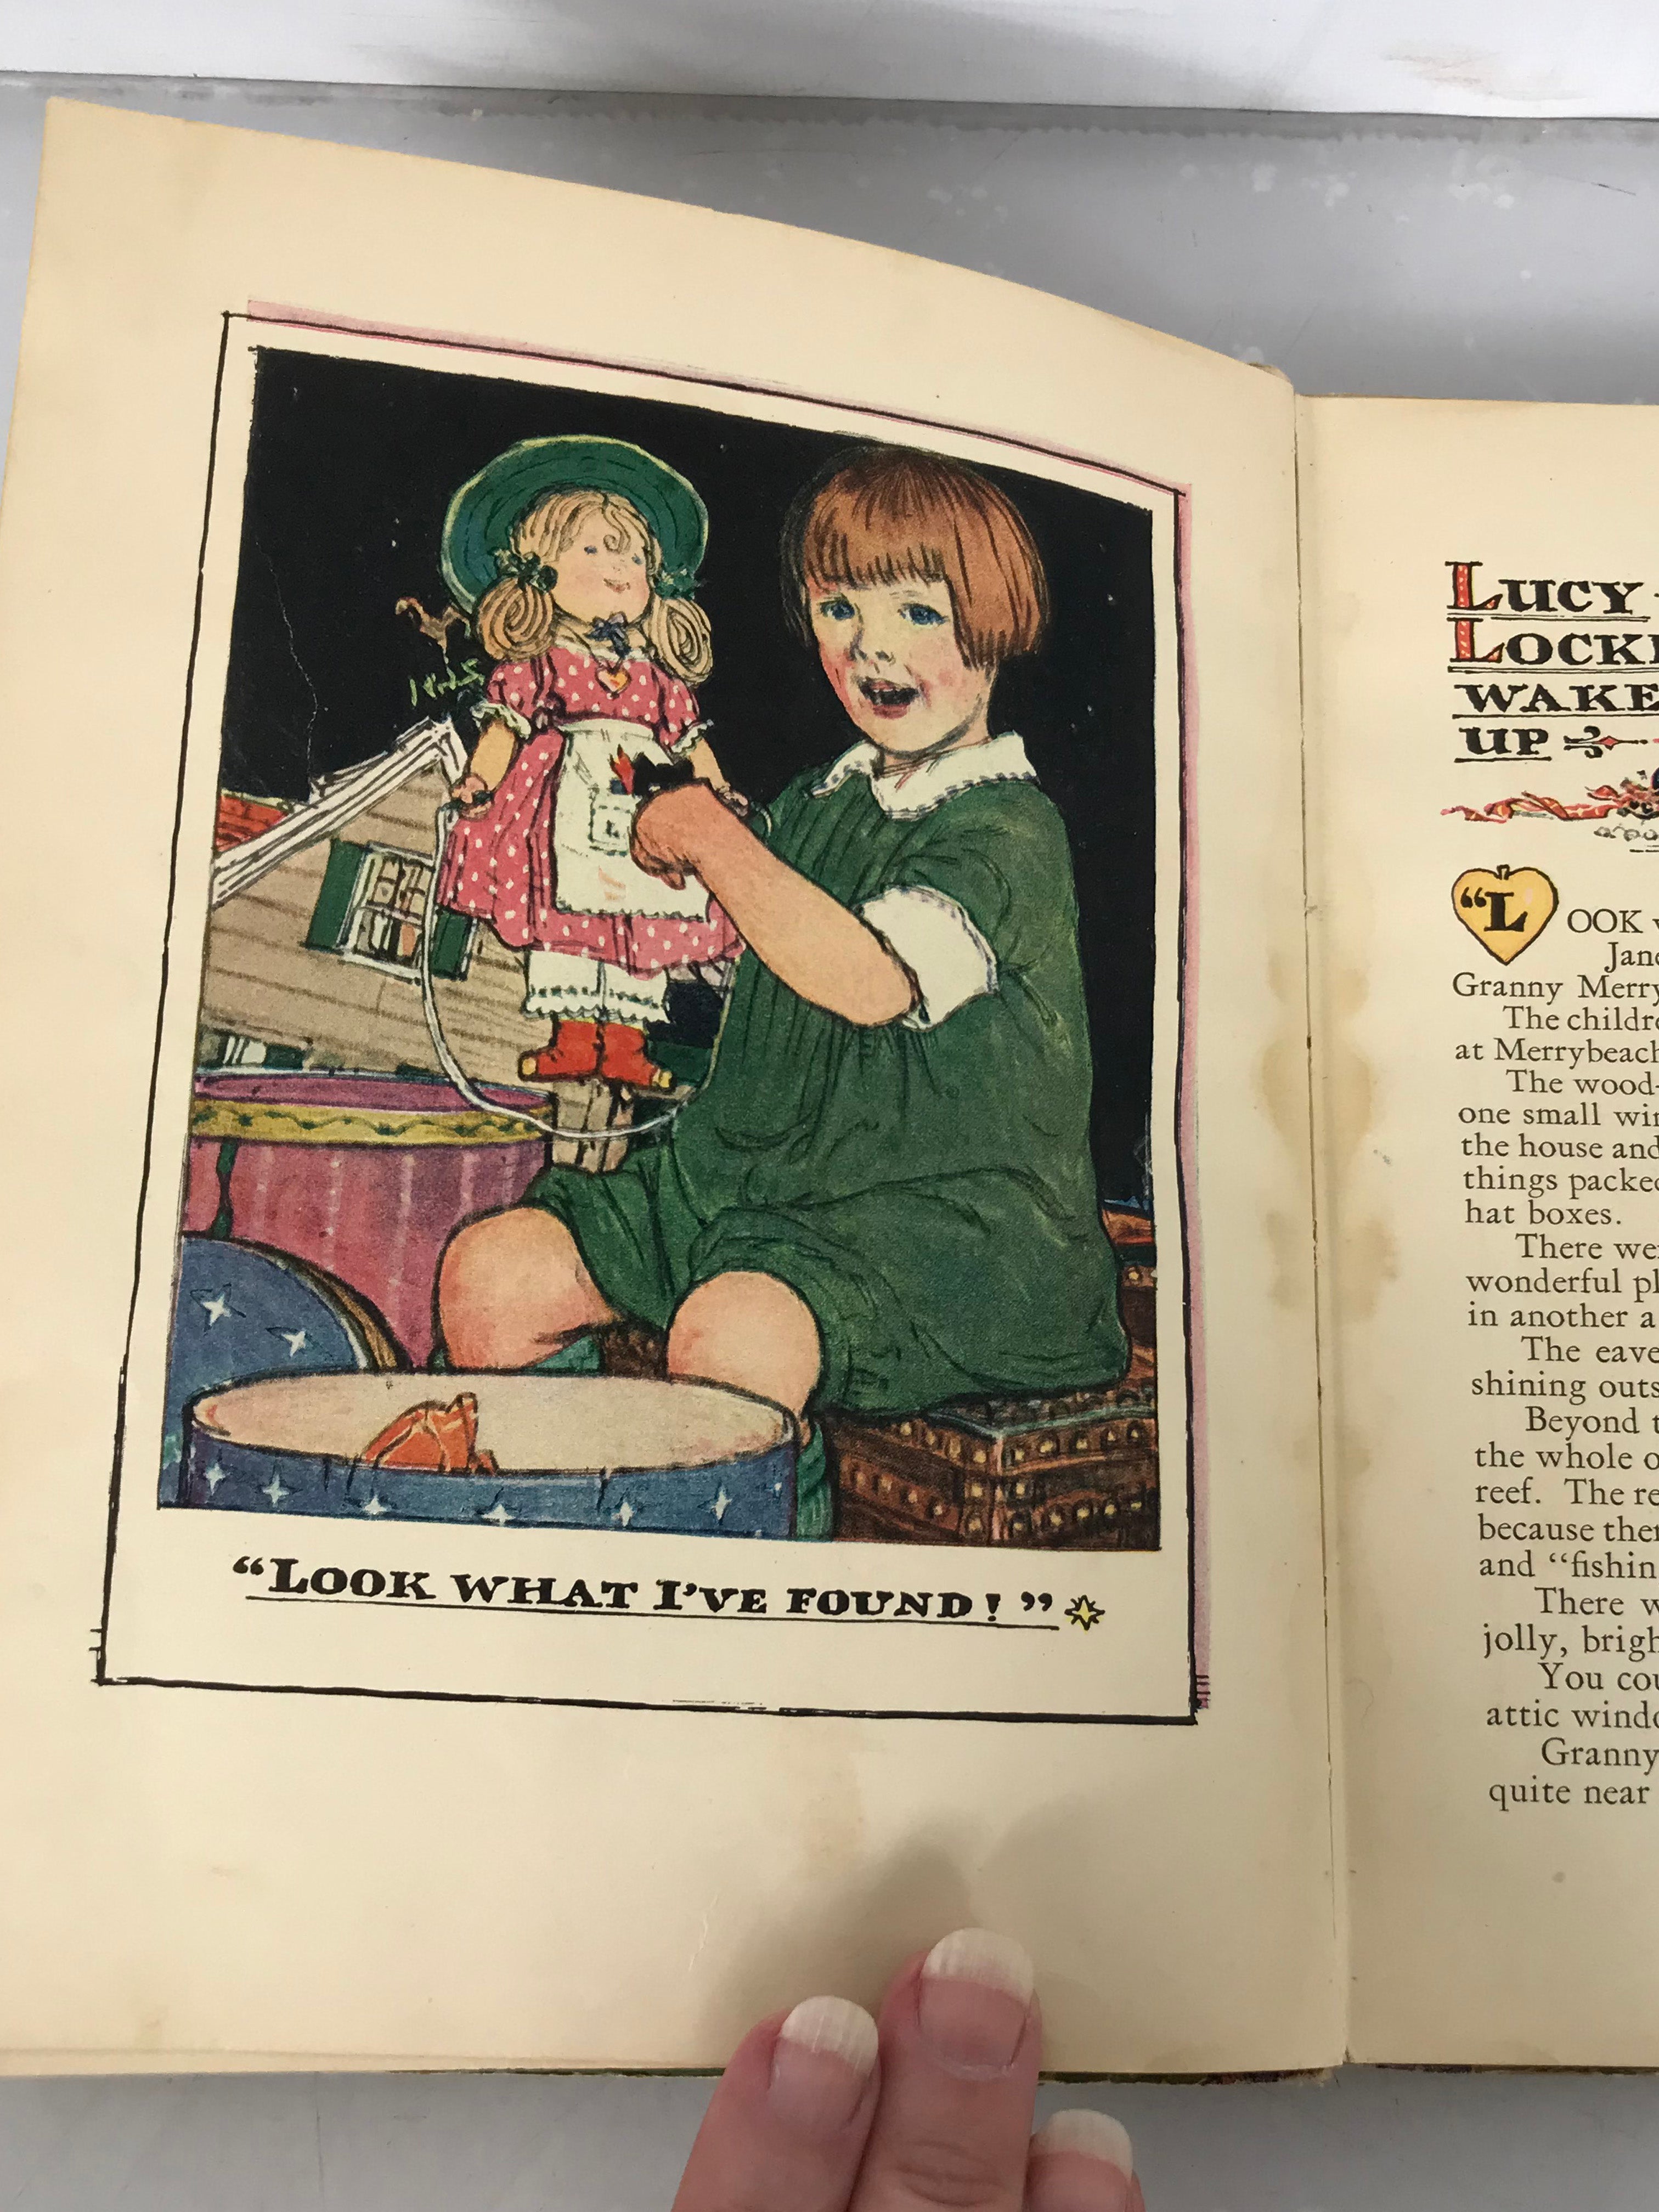 Lucy Locket The Doll with The Pocket by John Rae 1928 HC